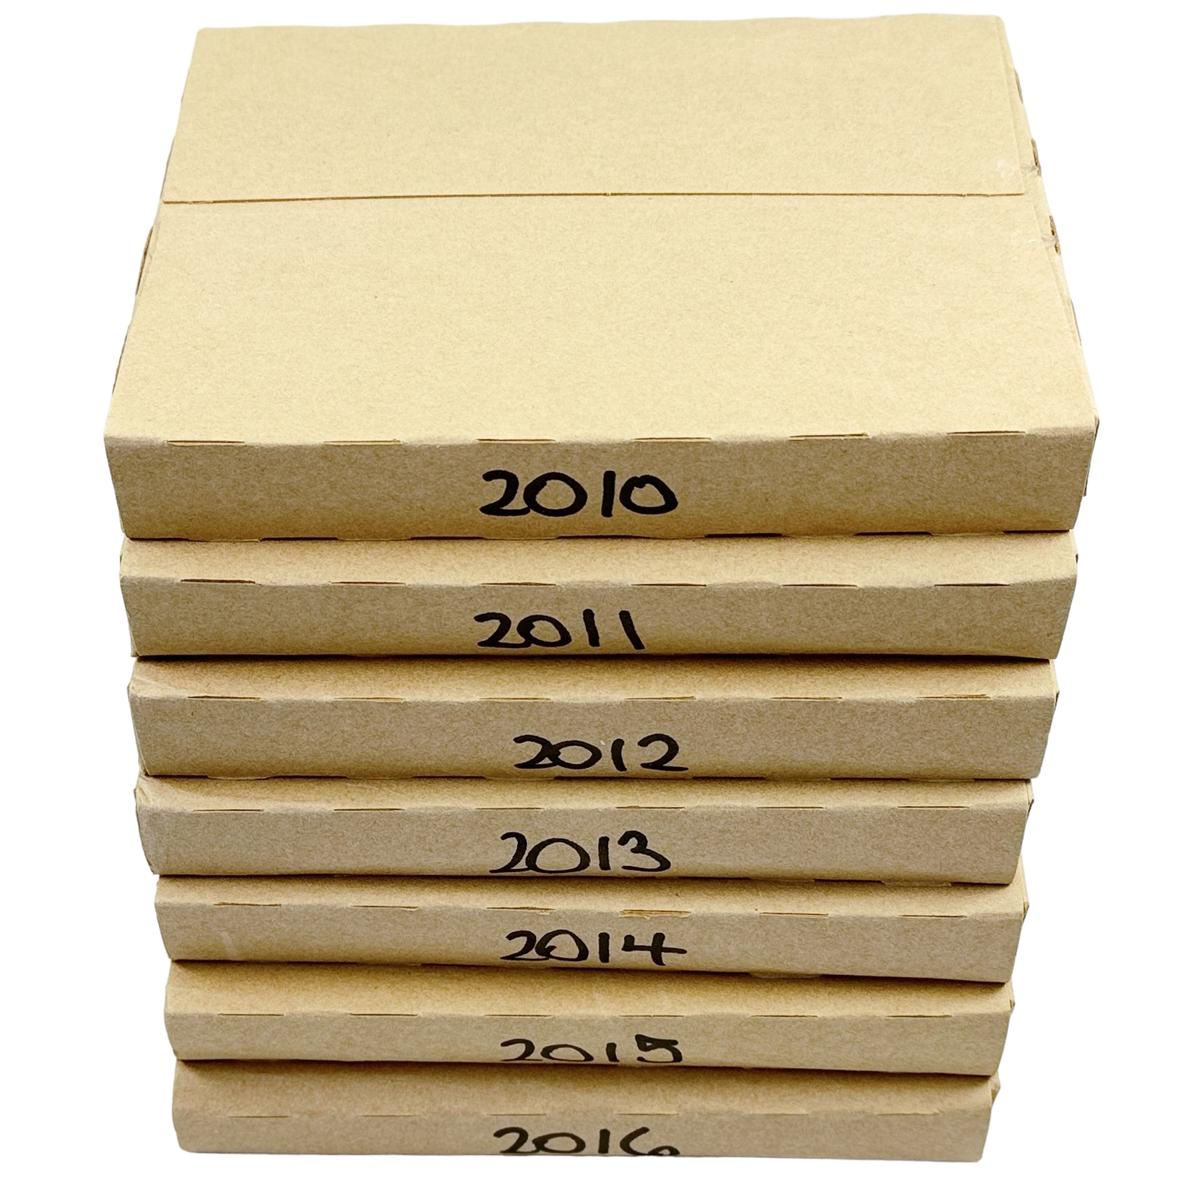 Complete run of 7 2010 to 2016 U.S. uncirculated Mint sets